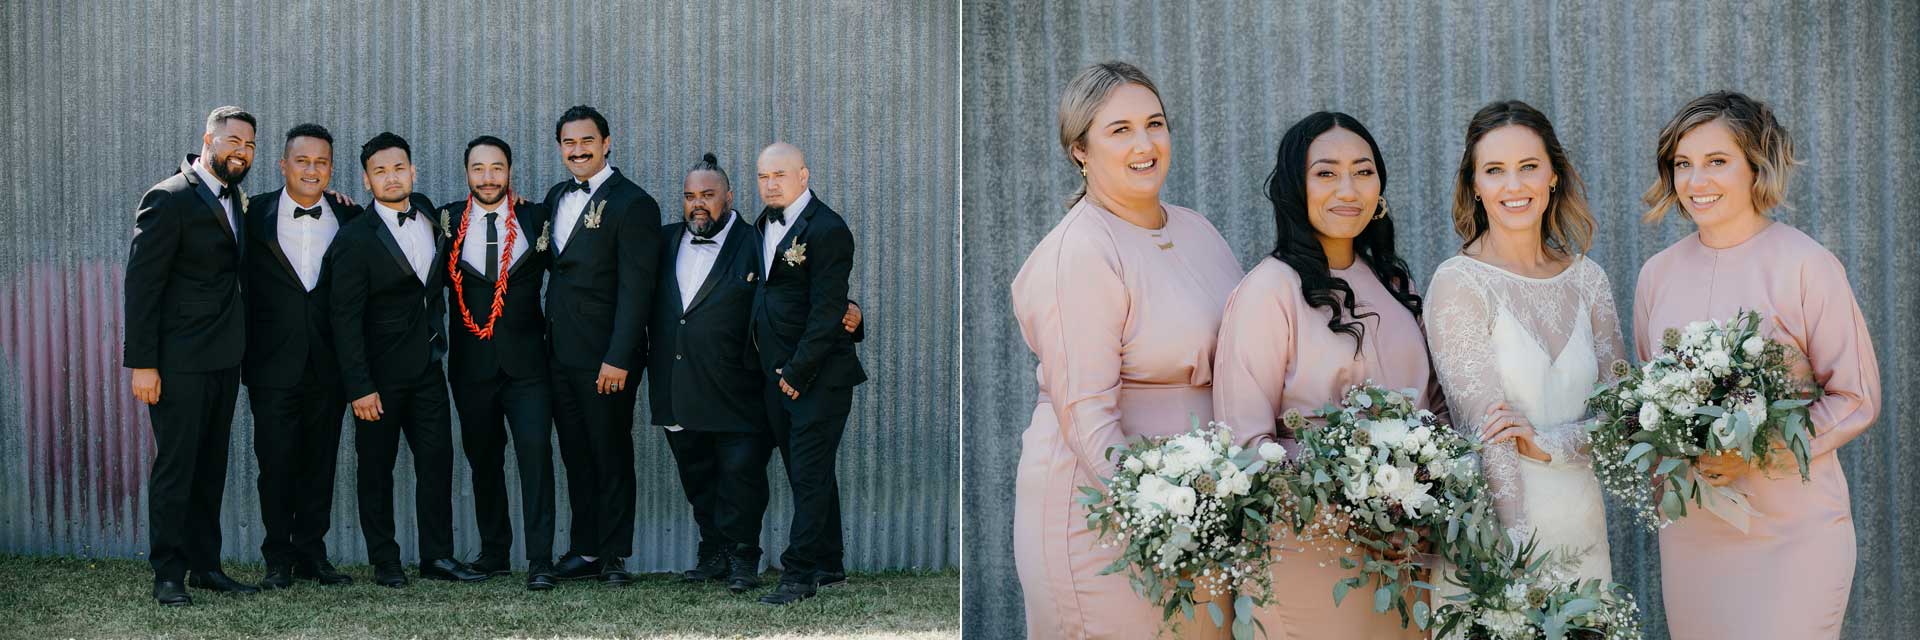 bridal party portrait photos against shed in kumeu auckland by sarah weber photography